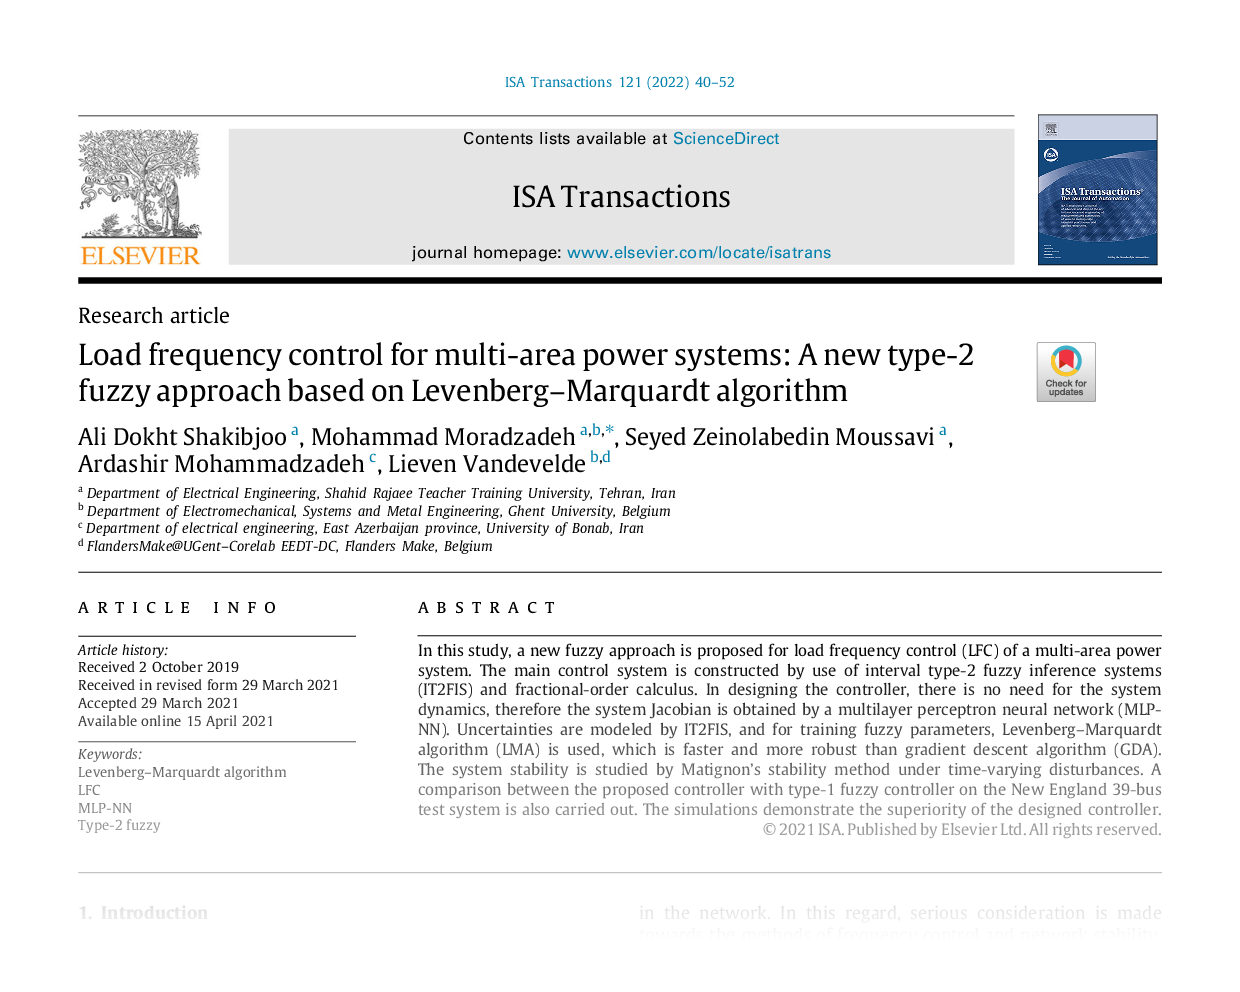 Load frequency control for multi-area power systems: A new type-2 fuzzy approach based on Levenberg–Marquardt algorithm